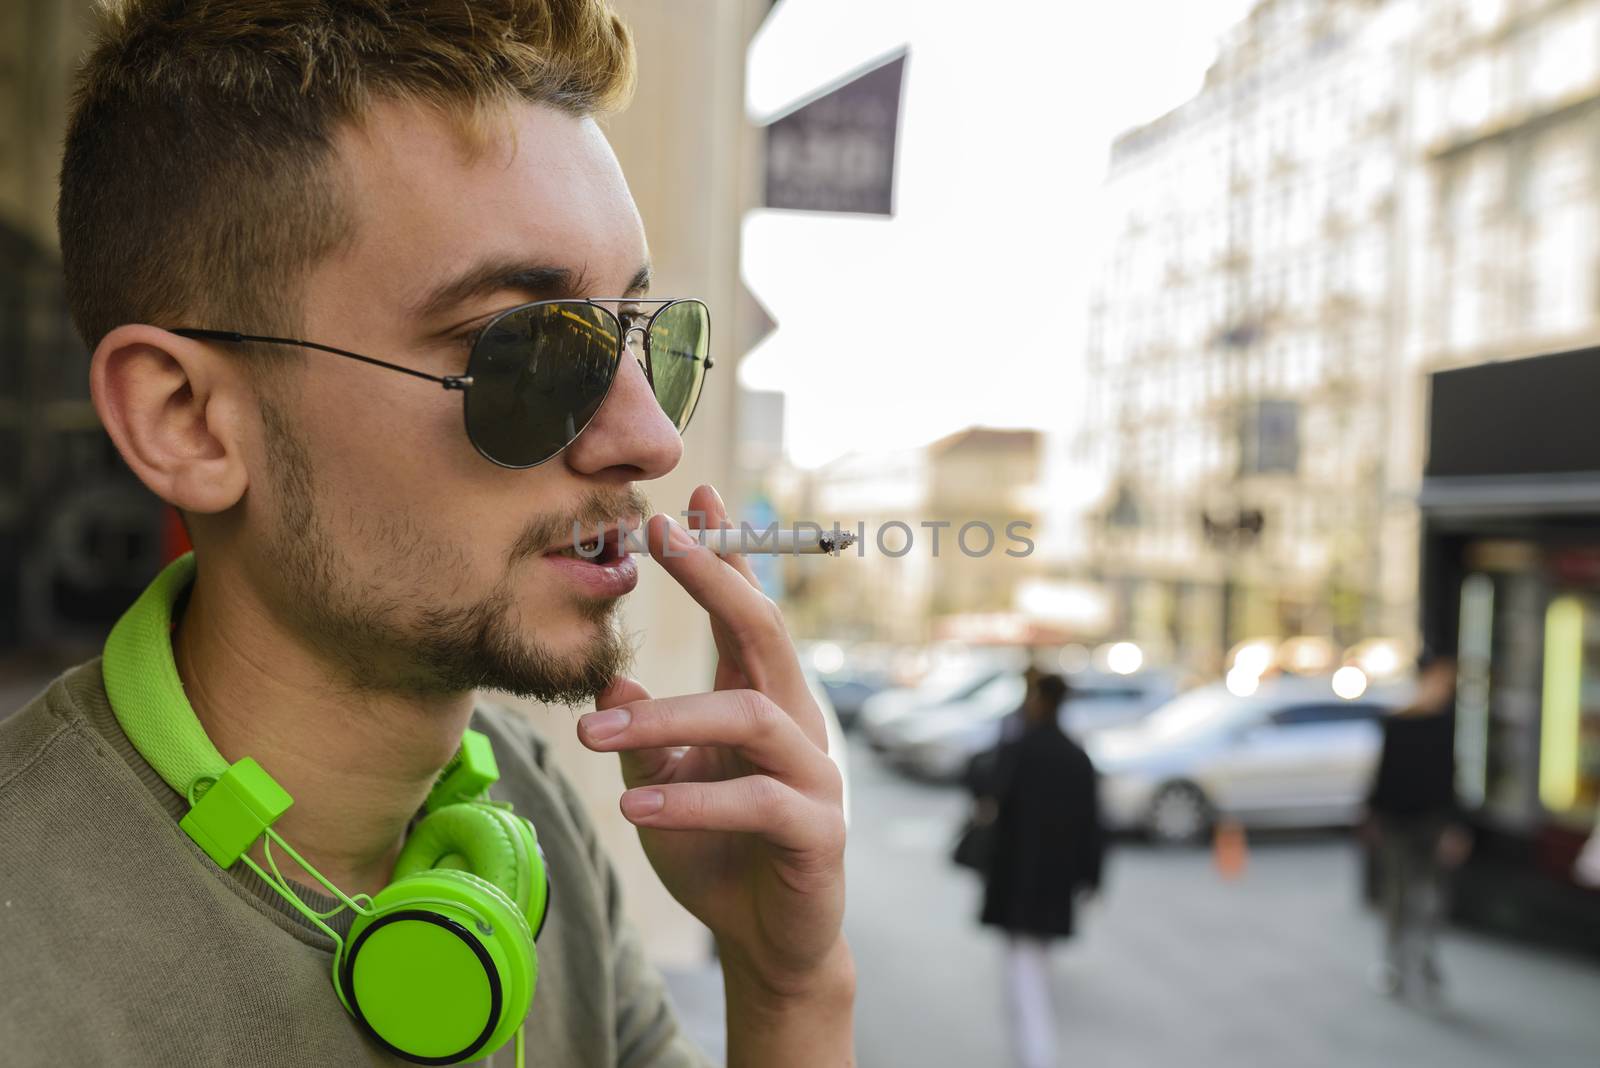 Young handsome man with green headphones and sunglasses enjoying a cigarette in the street.